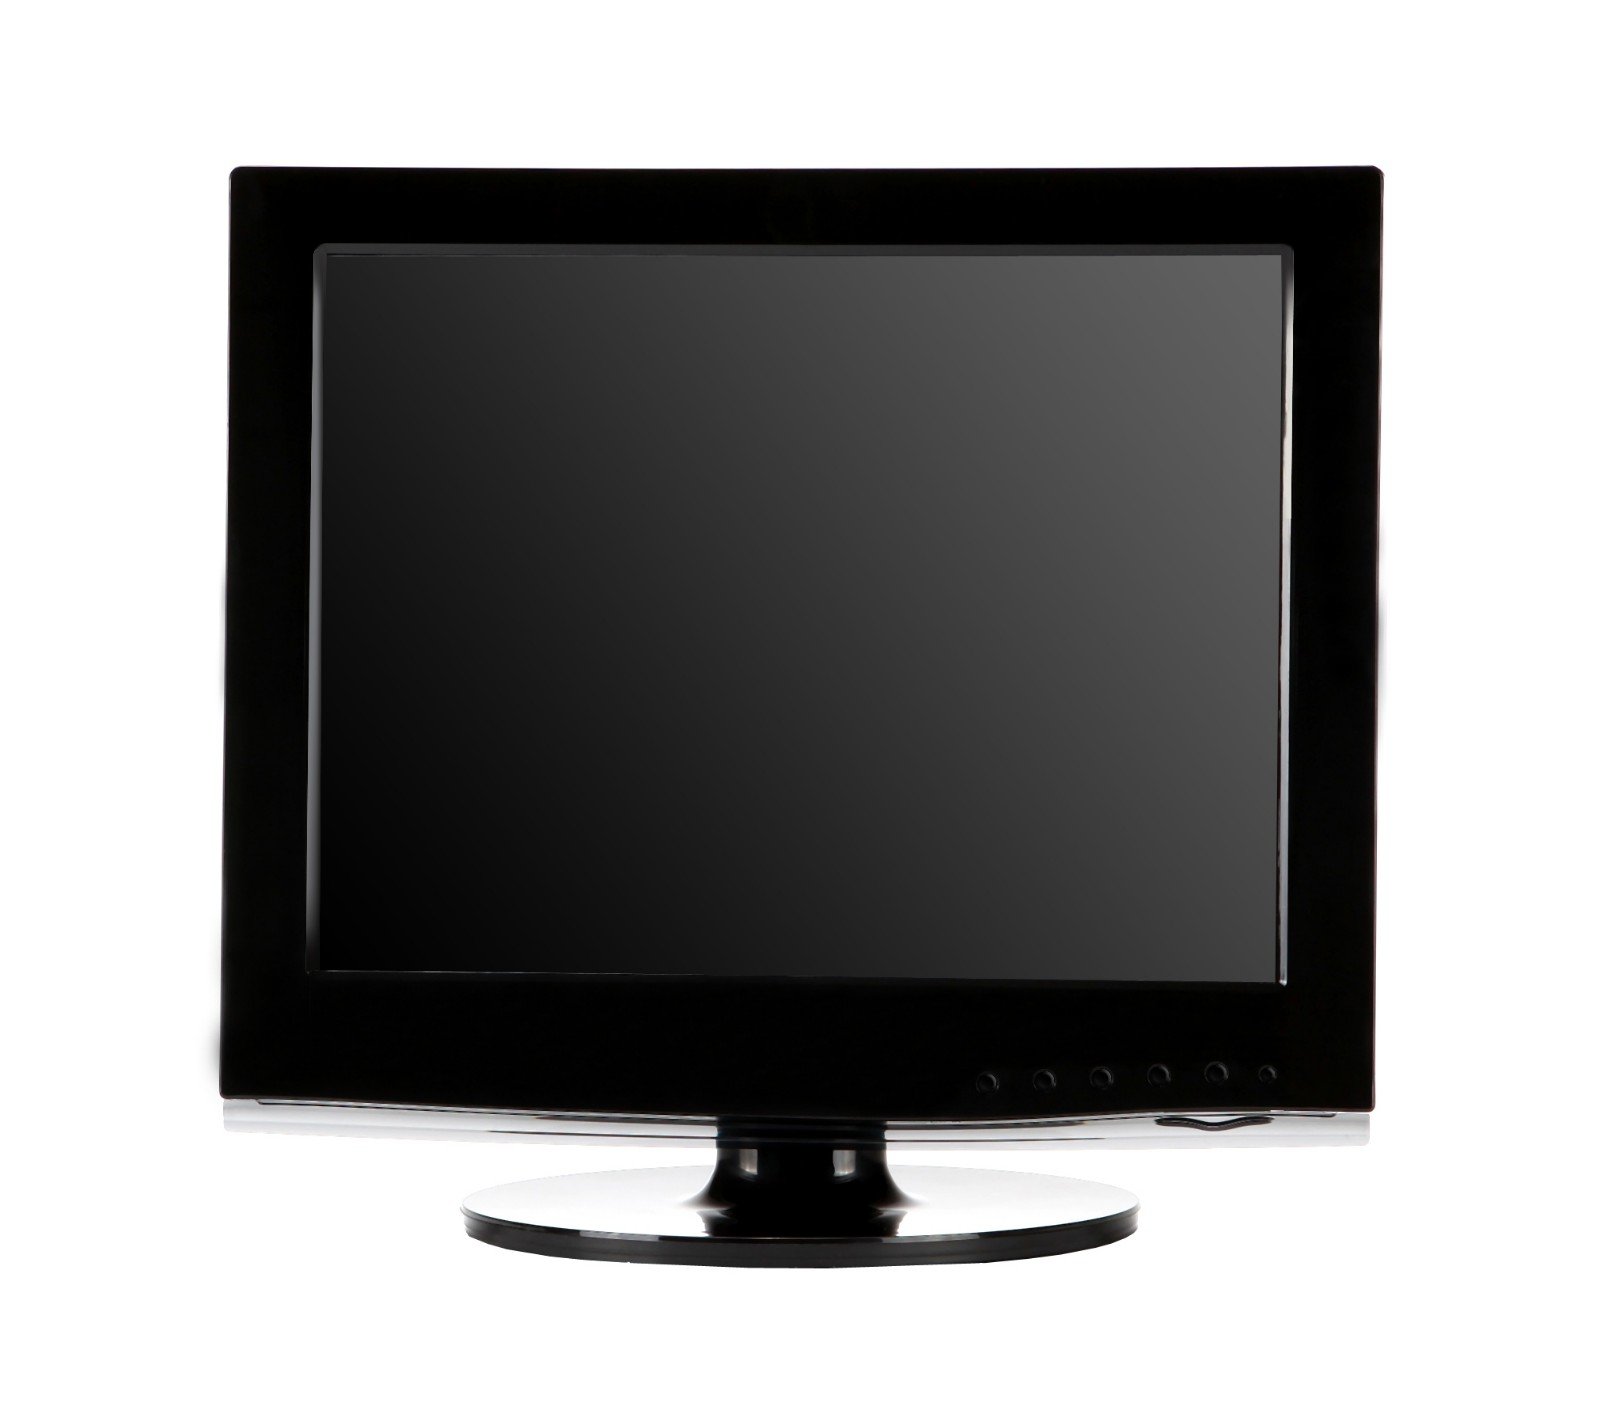 Xinyao LCD professional design monitor 15 lcd with hdmi output for tv screen-3